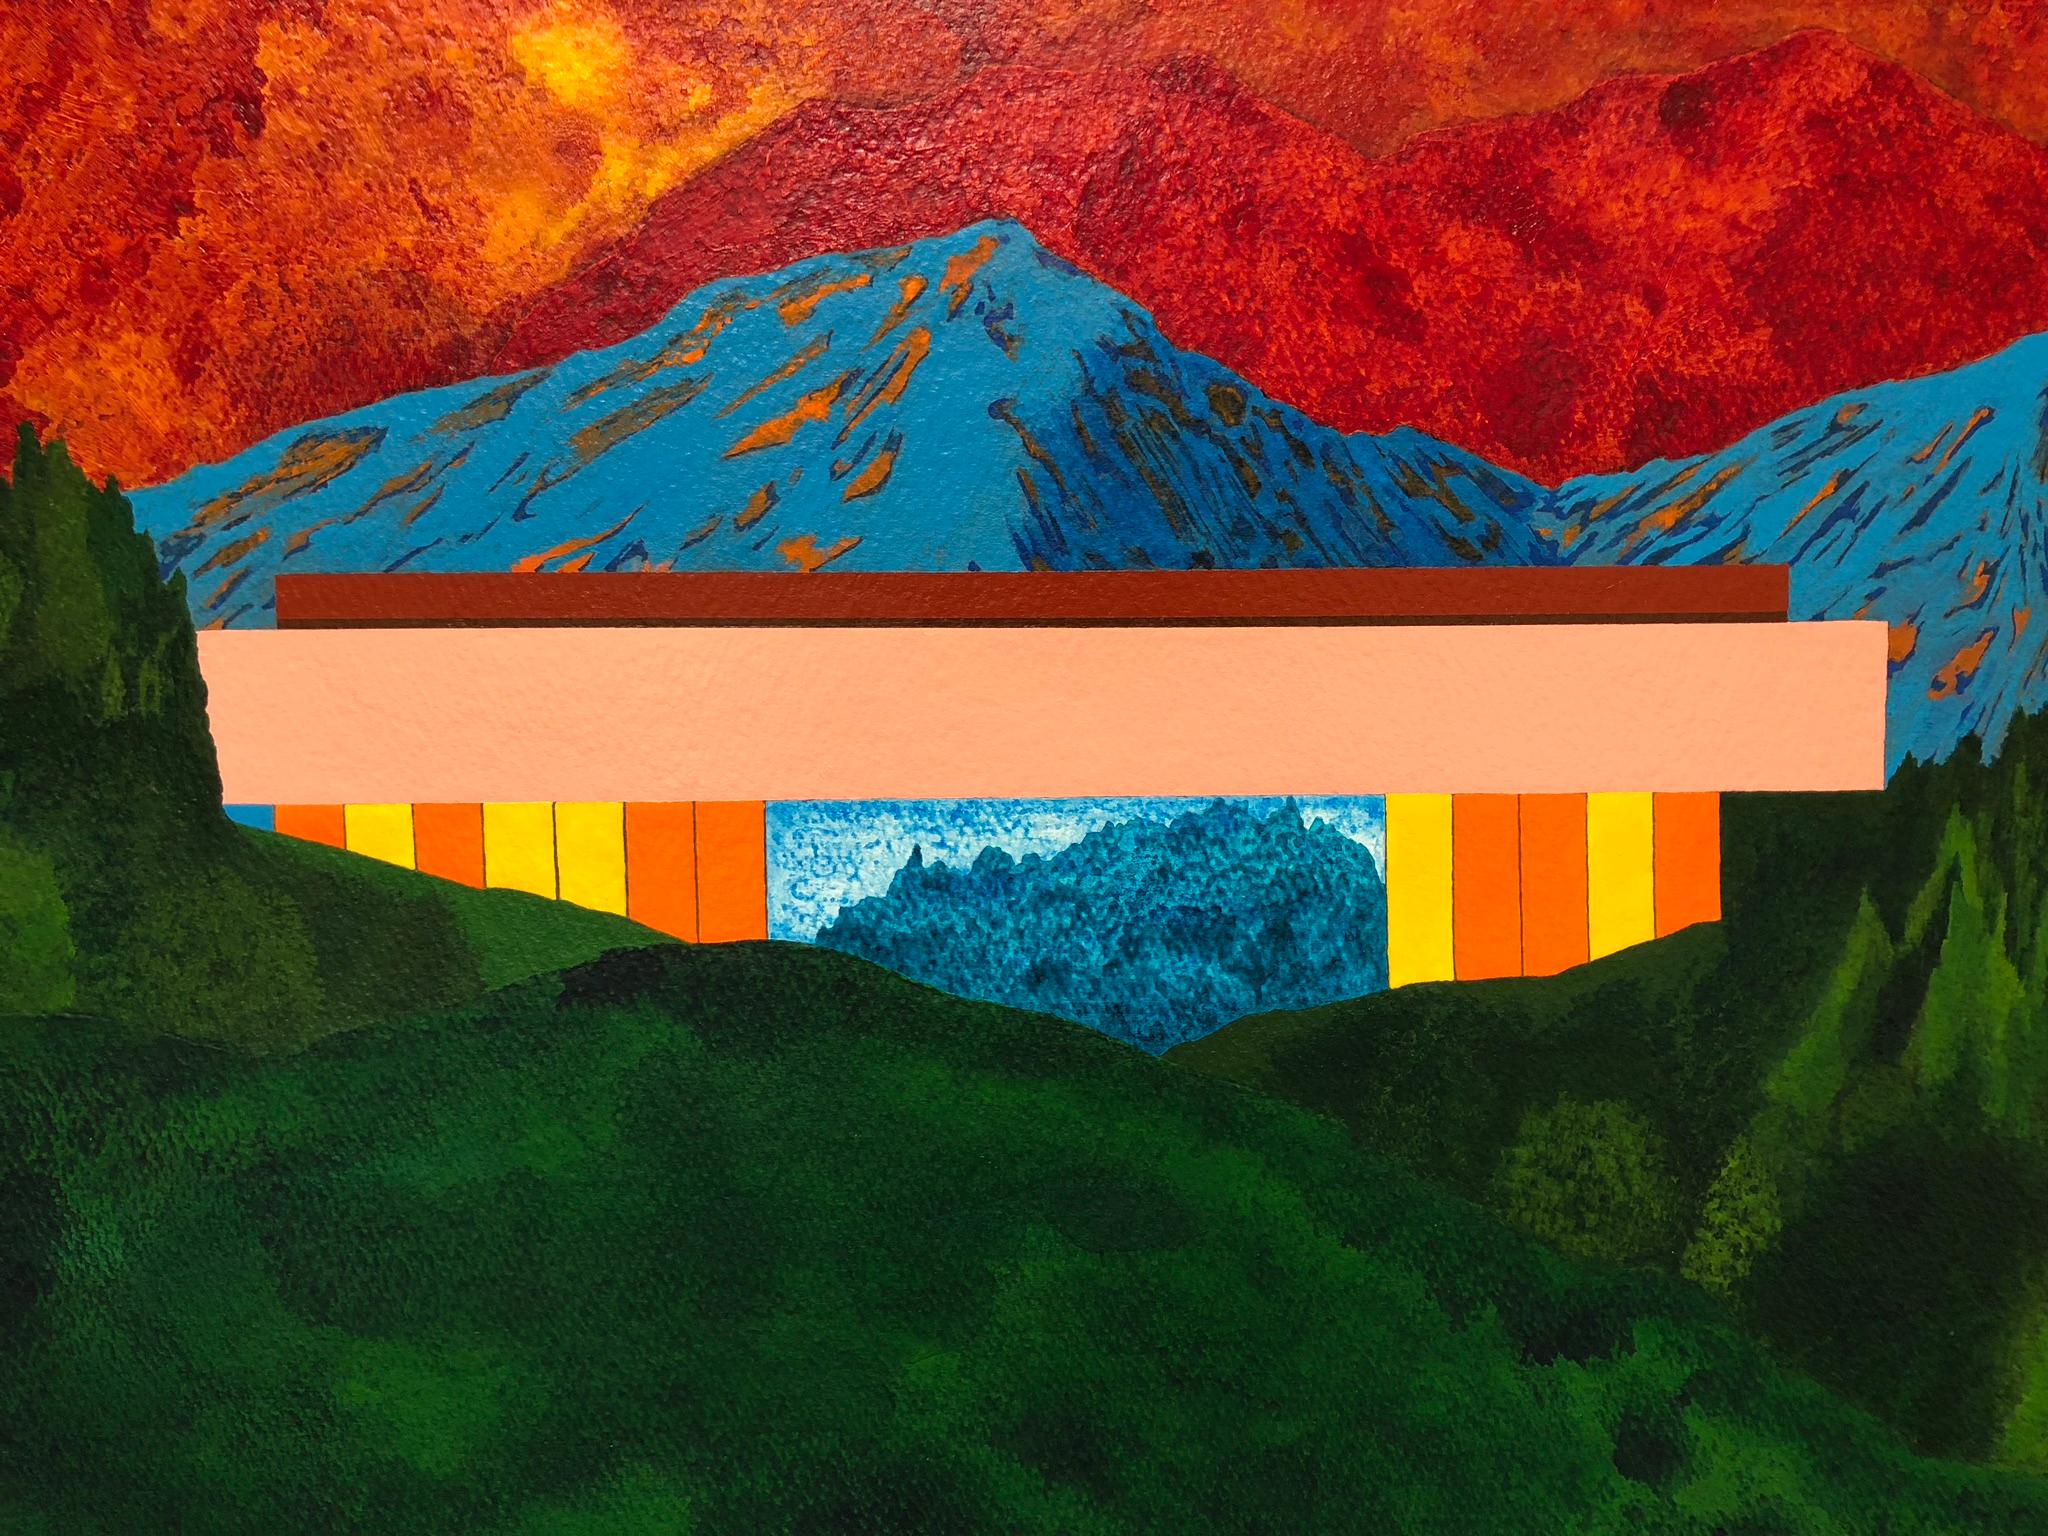 Ridge. Acrylic on paper, 22.5 x 30.25 in. Mountainous Landscape - Contemporary Painting by James Isherwood